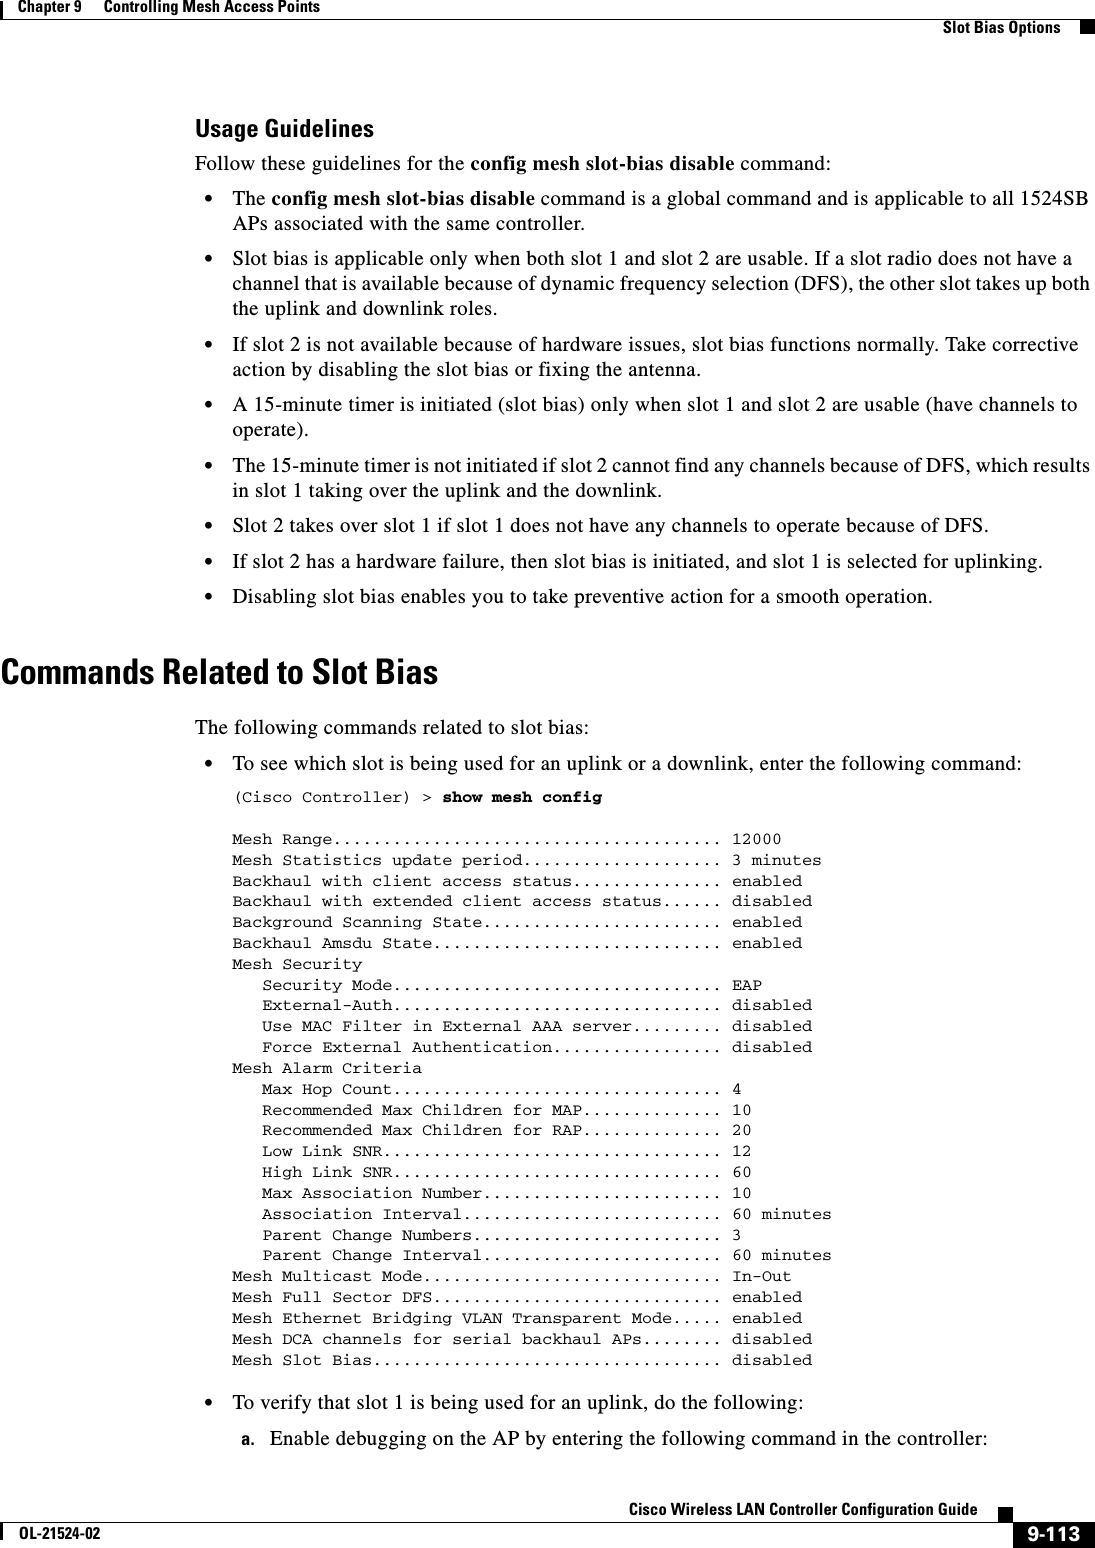  9-113Cisco Wireless LAN Controller Configuration GuideOL-21524-02Chapter 9      Controlling Mesh Access Points  Slot Bias OptionsUsage GuidelinesFollow these guidelines for the config mesh slot-bias disable command:  • The config mesh slot-bias disable command is a global command and is applicable to all 1524SB APs associated with the same controller.  • Slot bias is applicable only when both slot 1 and slot 2 are usable. If a slot radio does not have a channel that is available because of dynamic frequency selection (DFS), the other slot takes up both the uplink and downlink roles.  • If slot 2 is not available because of hardware issues, slot bias functions normally. Take corrective action by disabling the slot bias or fixing the antenna.  • A 15-minute timer is initiated (slot bias) only when slot 1 and slot 2 are usable (have channels to operate).  • The 15-minute timer is not initiated if slot 2 cannot find any channels because of DFS, which results in slot 1 taking over the uplink and the downlink.  • Slot 2 takes over slot 1 if slot 1 does not have any channels to operate because of DFS.  • If slot 2 has a hardware failure, then slot bias is initiated, and slot 1 is selected for uplinking.  • Disabling slot bias enables you to take preventive action for a smooth operation.Commands Related to Slot BiasThe following commands related to slot bias:  • To see which slot is being used for an uplink or a downlink, enter the following command:(Cisco Controller) &gt; show mesh configMesh Range....................................... 12000Mesh Statistics update period.................... 3 minutesBackhaul with client access status............... enabledBackhaul with extended client access status...... disabledBackground Scanning State........................ enabledBackhaul Amsdu State............................. enabledMesh Security   Security Mode................................. EAP   External-Auth................................. disabled   Use MAC Filter in External AAA server......... disabled   Force External Authentication................. disabledMesh Alarm Criteria   Max Hop Count................................. 4   Recommended Max Children for MAP.............. 10   Recommended Max Children for RAP.............. 20   Low Link SNR.................................. 12   High Link SNR................................. 60   Max Association Number........................ 10   Association Interval.......................... 60 minutes   Parent Change Numbers......................... 3   Parent Change Interval........................ 60 minutesMesh Multicast Mode.............................. In-OutMesh Full Sector DFS............................. enabledMesh Ethernet Bridging VLAN Transparent Mode..... enabledMesh DCA channels for serial backhaul APs........ disabledMesh Slot Bias................................... disabled  • To verify that slot 1 is being used for an uplink, do the following:a. Enable debugging on the AP by entering the following command in the controller: